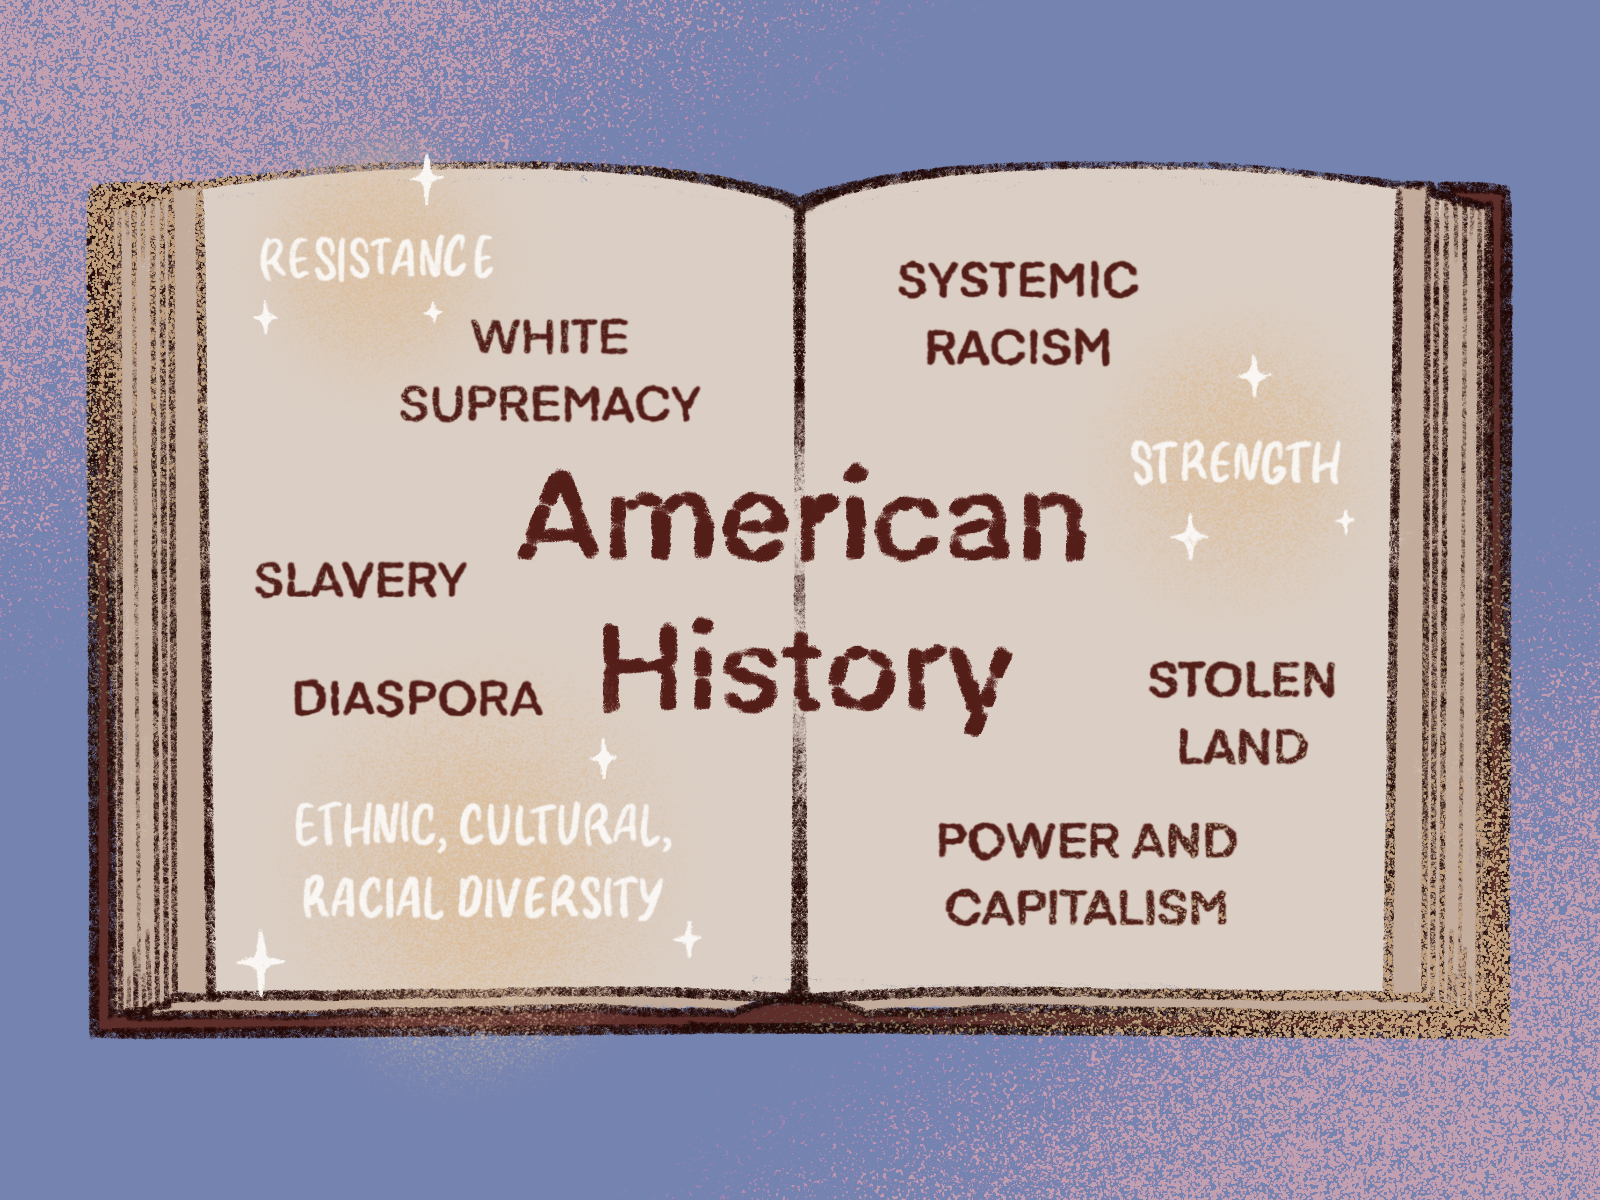 Book entitled American History with subjects "systemic racism" "strength" "stolen land" "resistance" "diaspora" "power and capitalism"